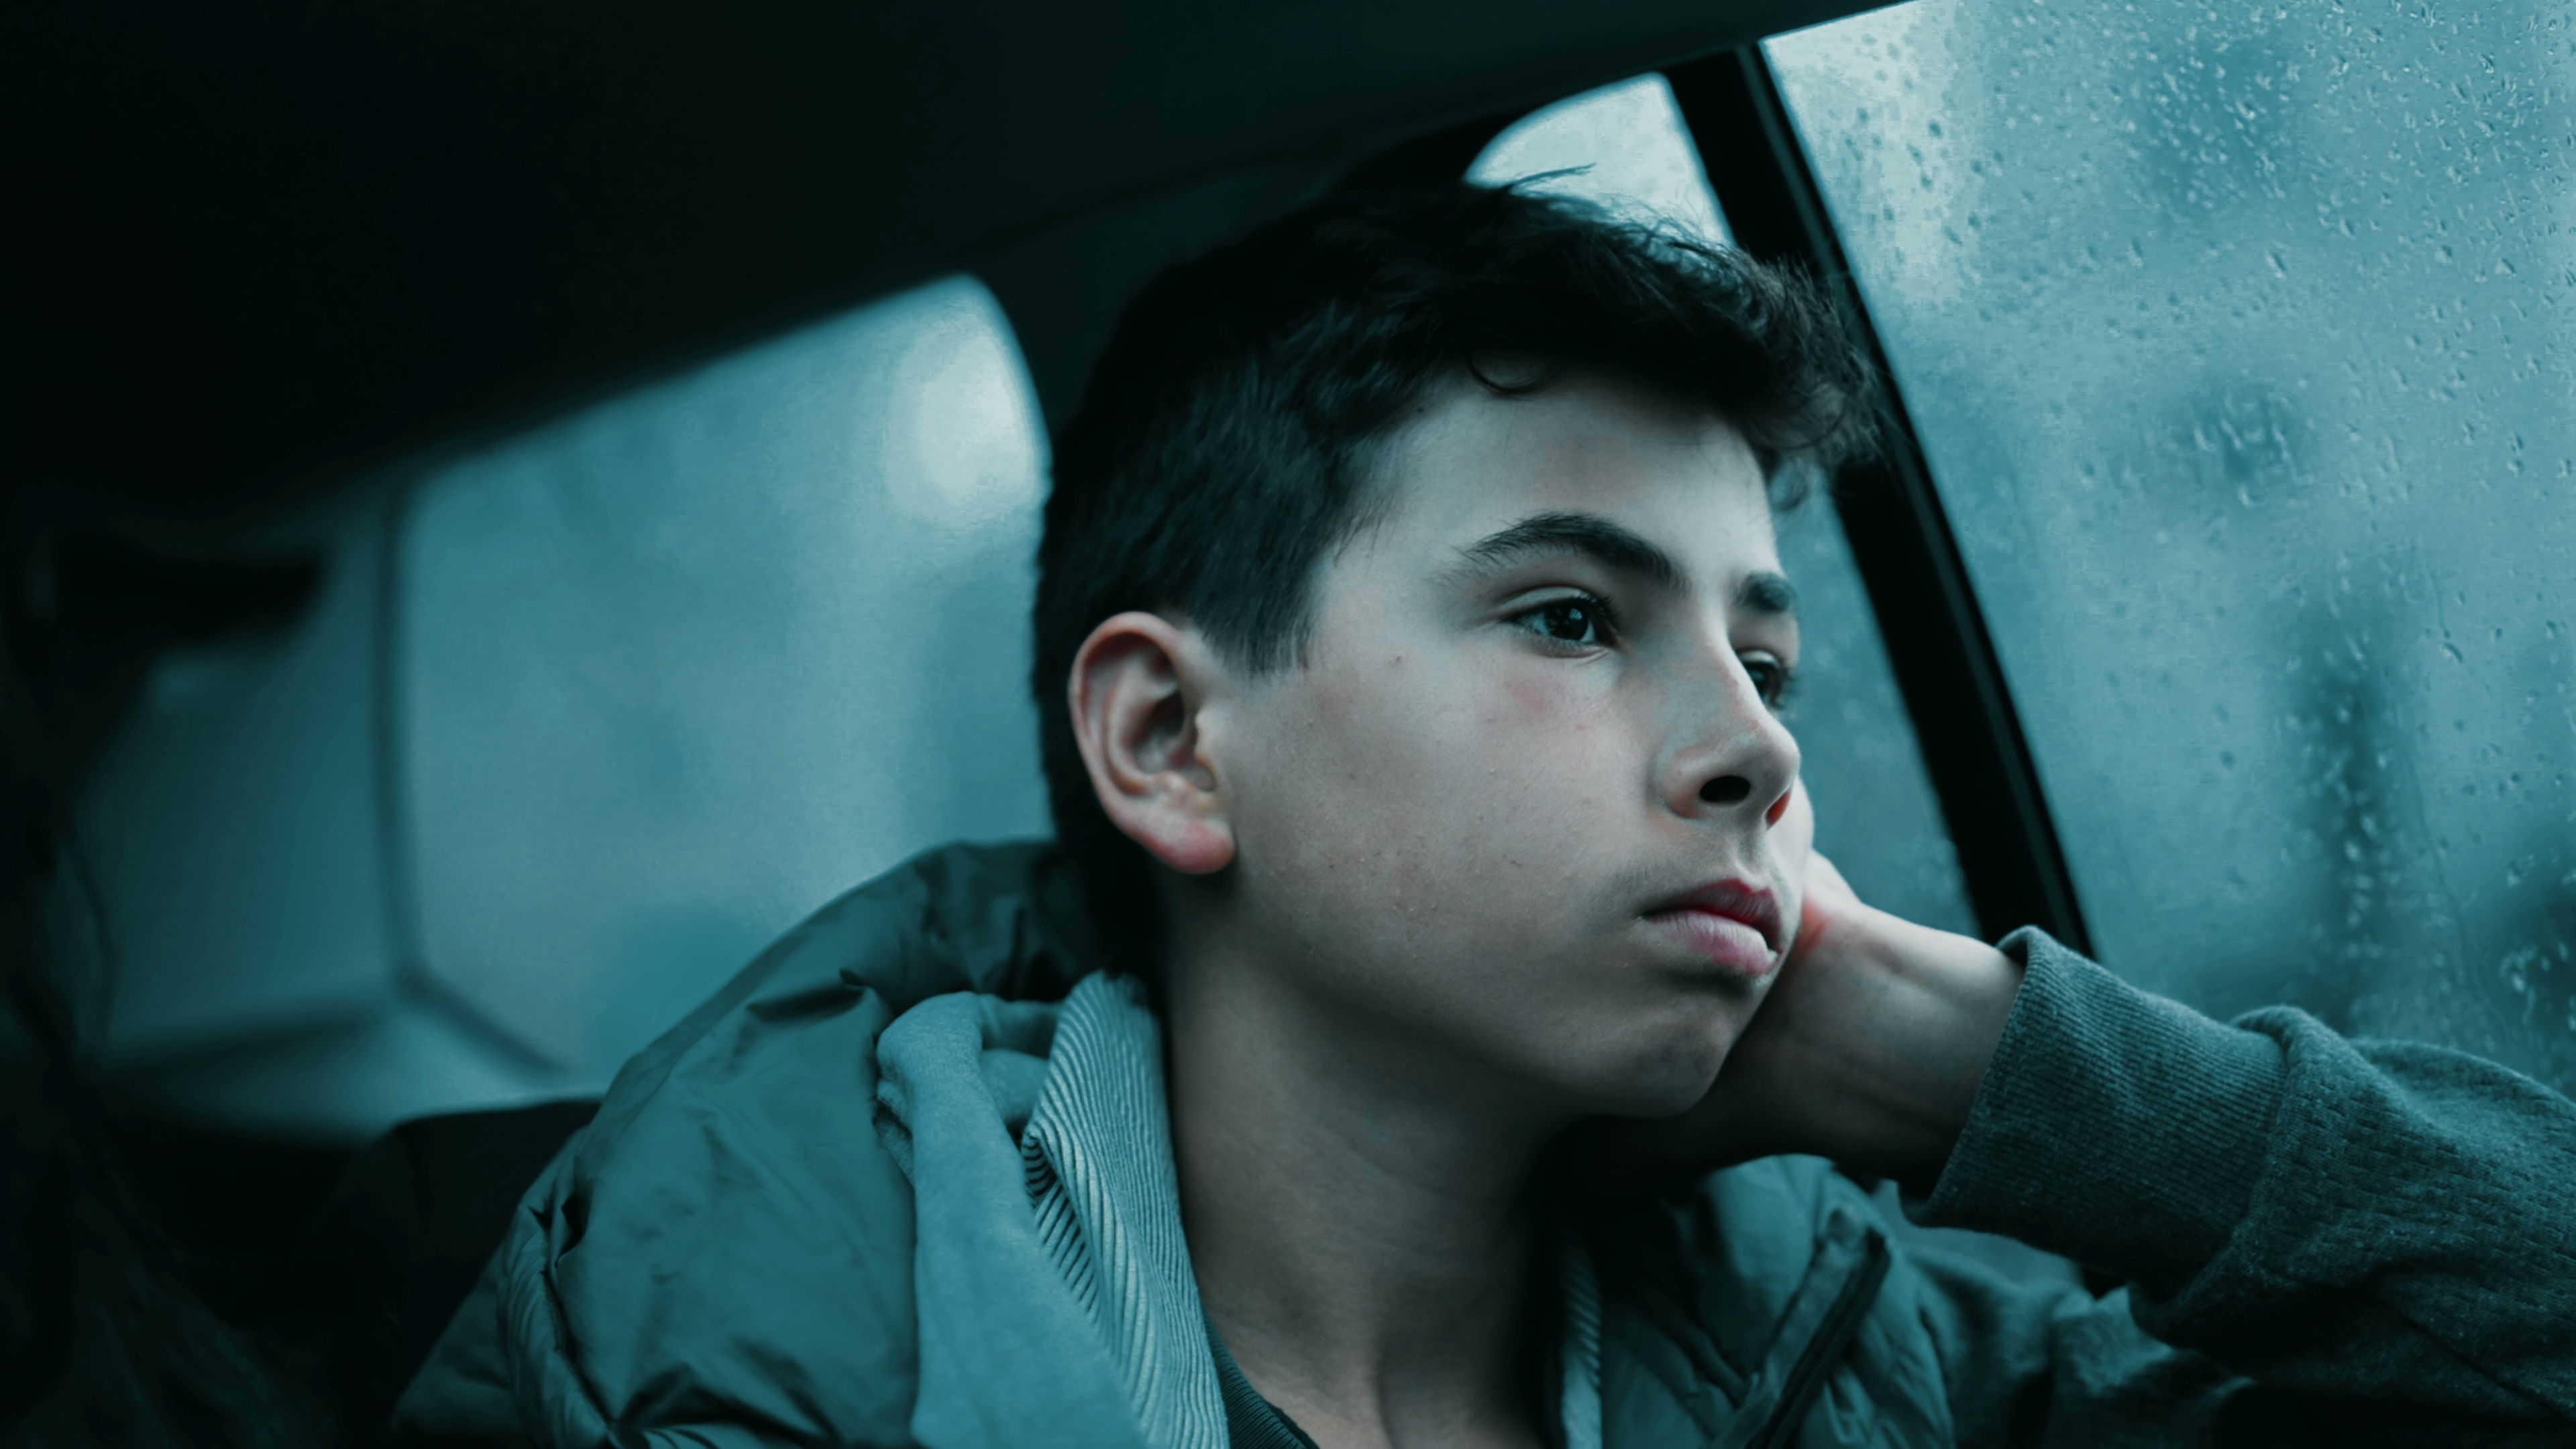 Sad young boy is sitting near the window in the car | Source: Shutterstock.com